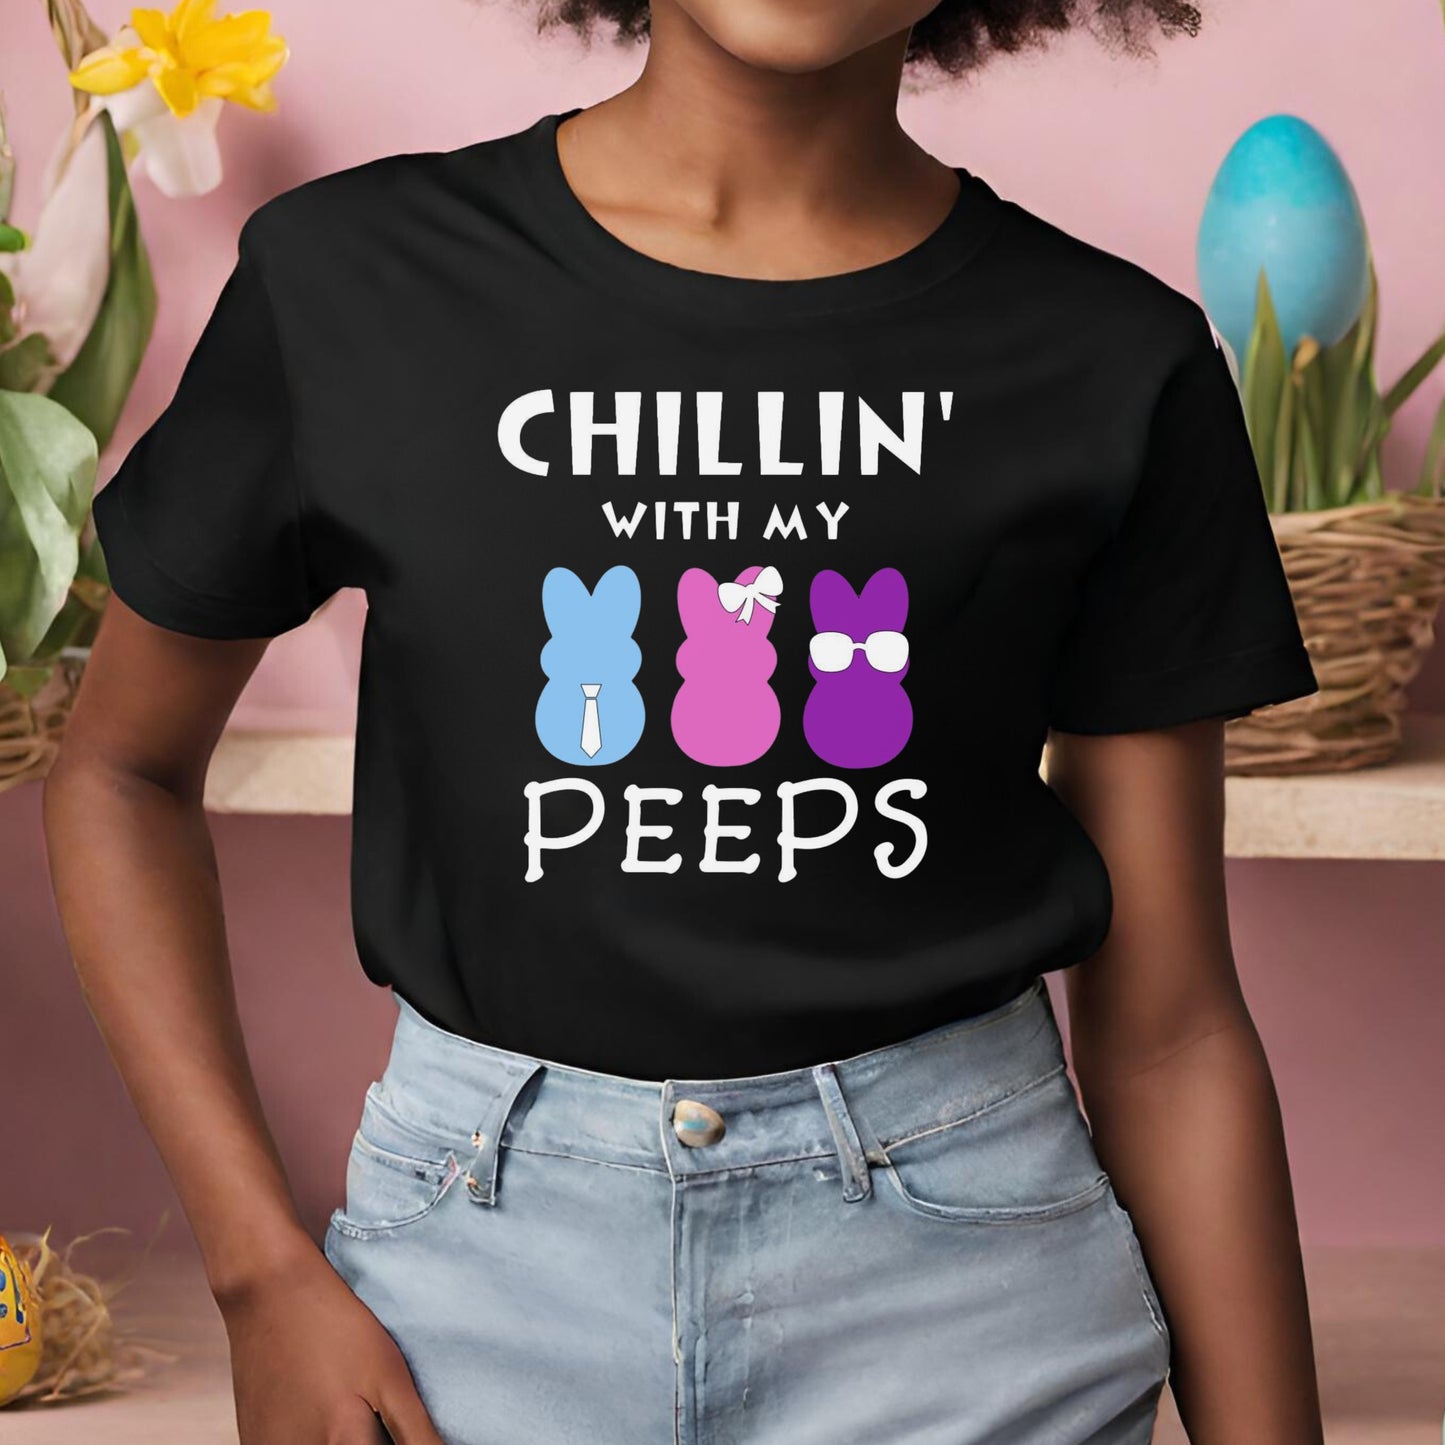 CHILLIN' WITH MY PEEPS